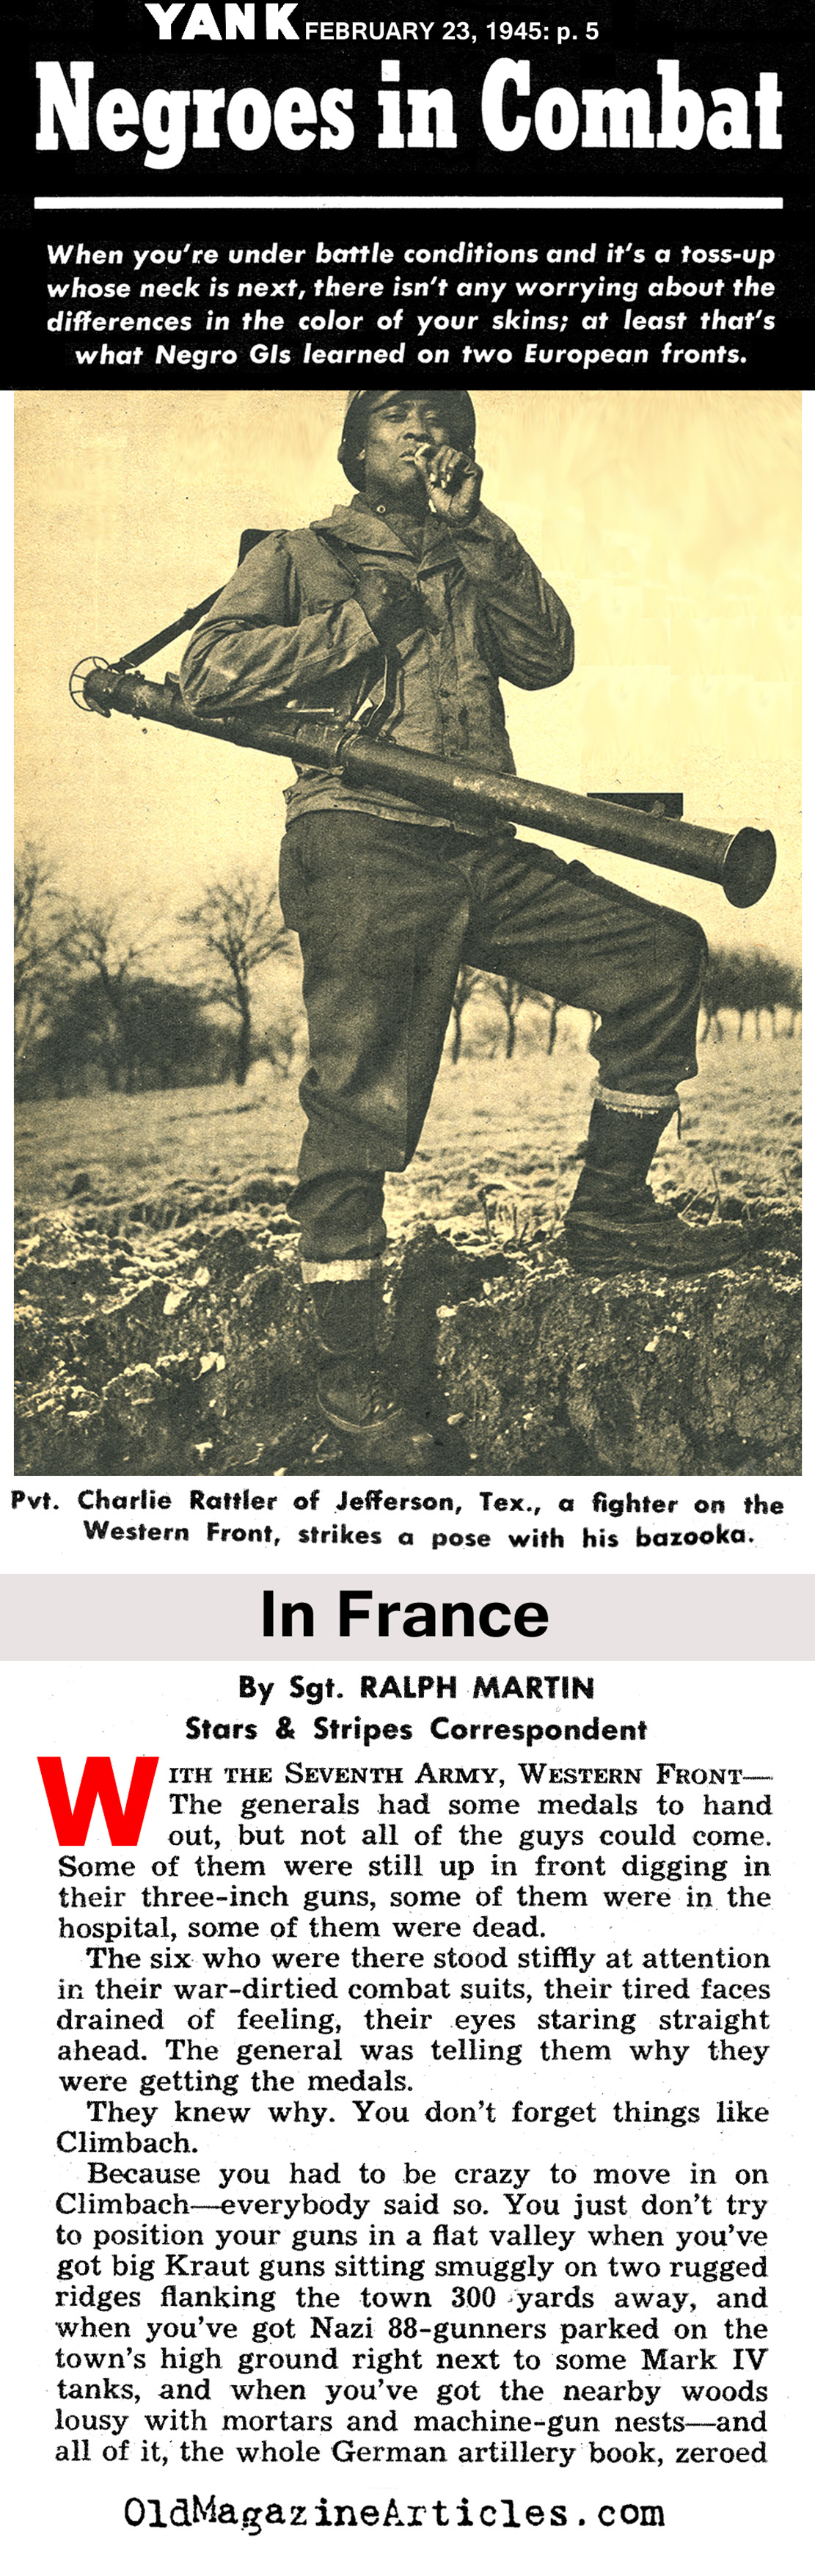 The African-Americans Fighting in France and Italy (Yank Magazine, 1945)